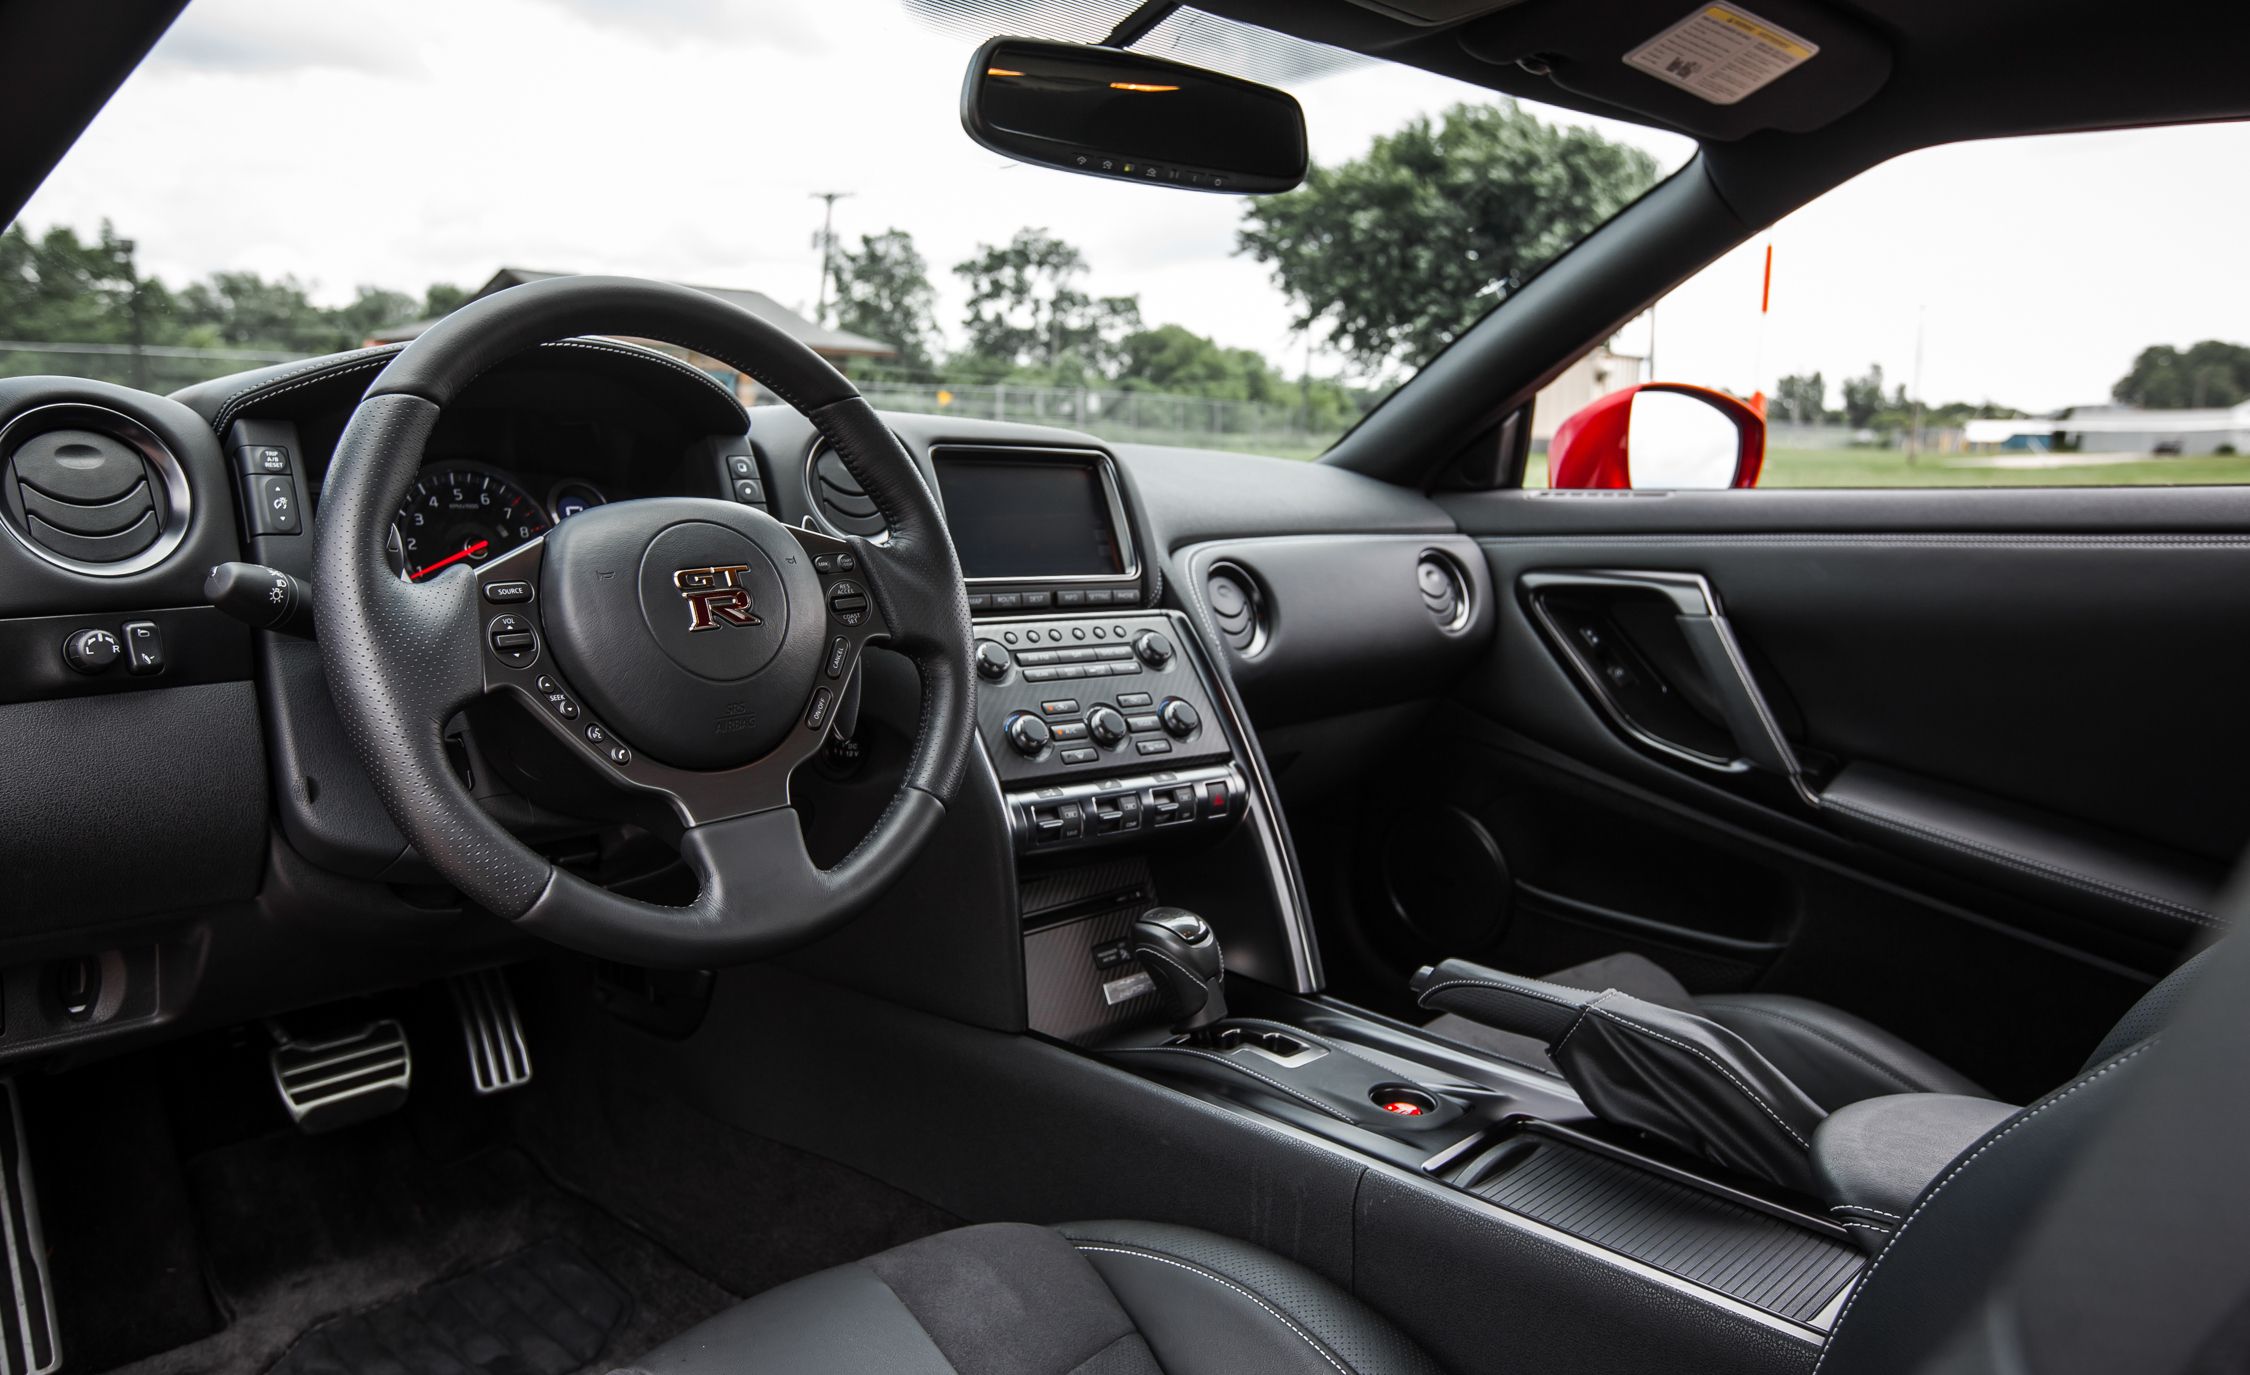 2015 Nissan Gt R Interior (View 9 of 25)